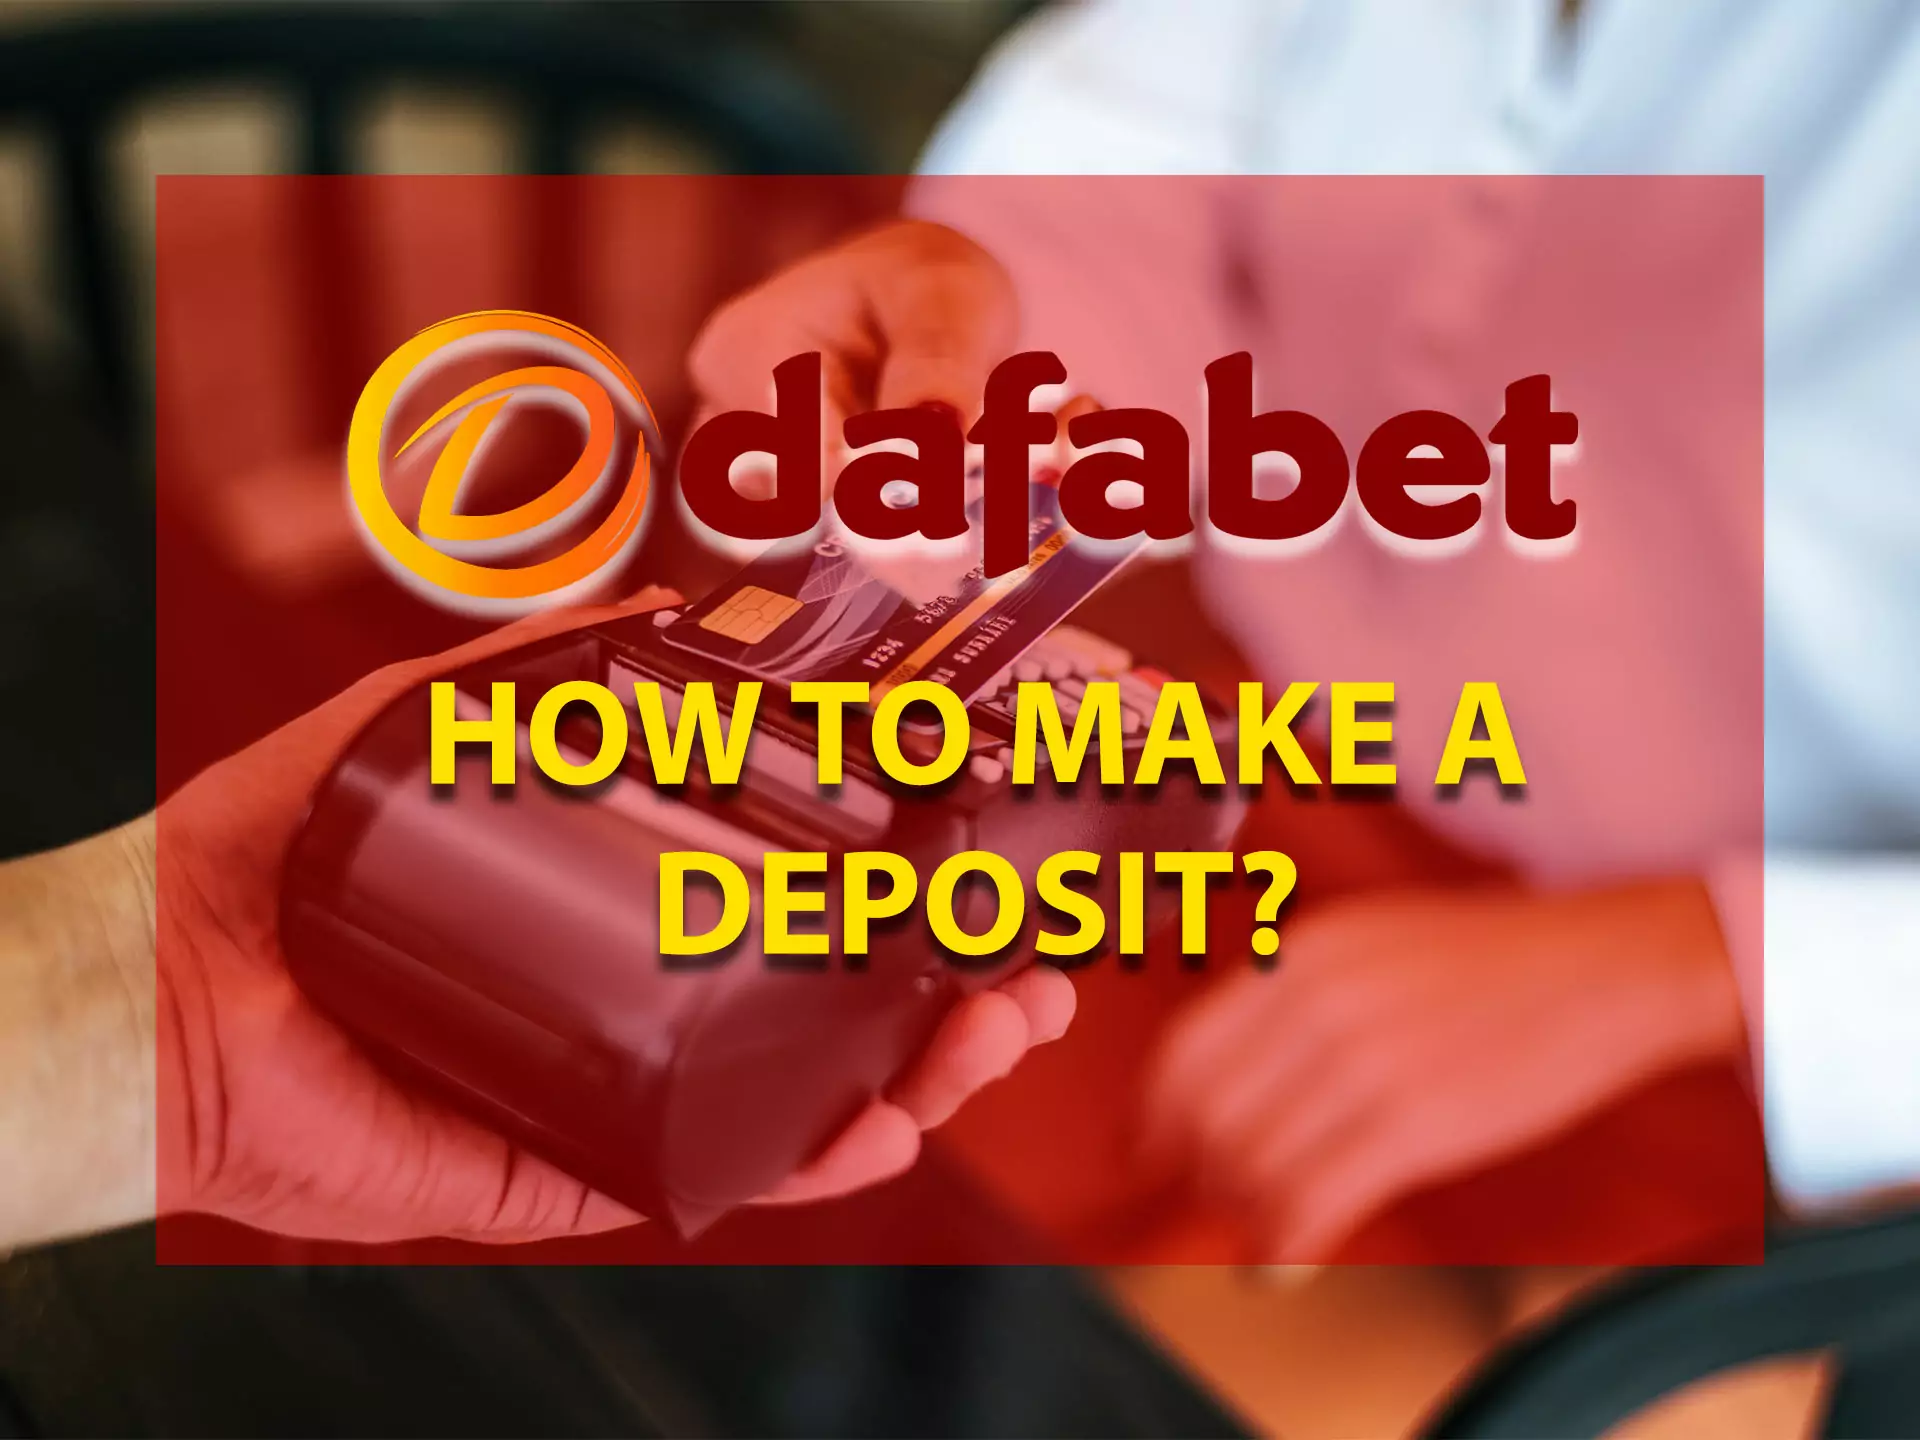 Register at Dafabet and top up your account with Indian rupees.